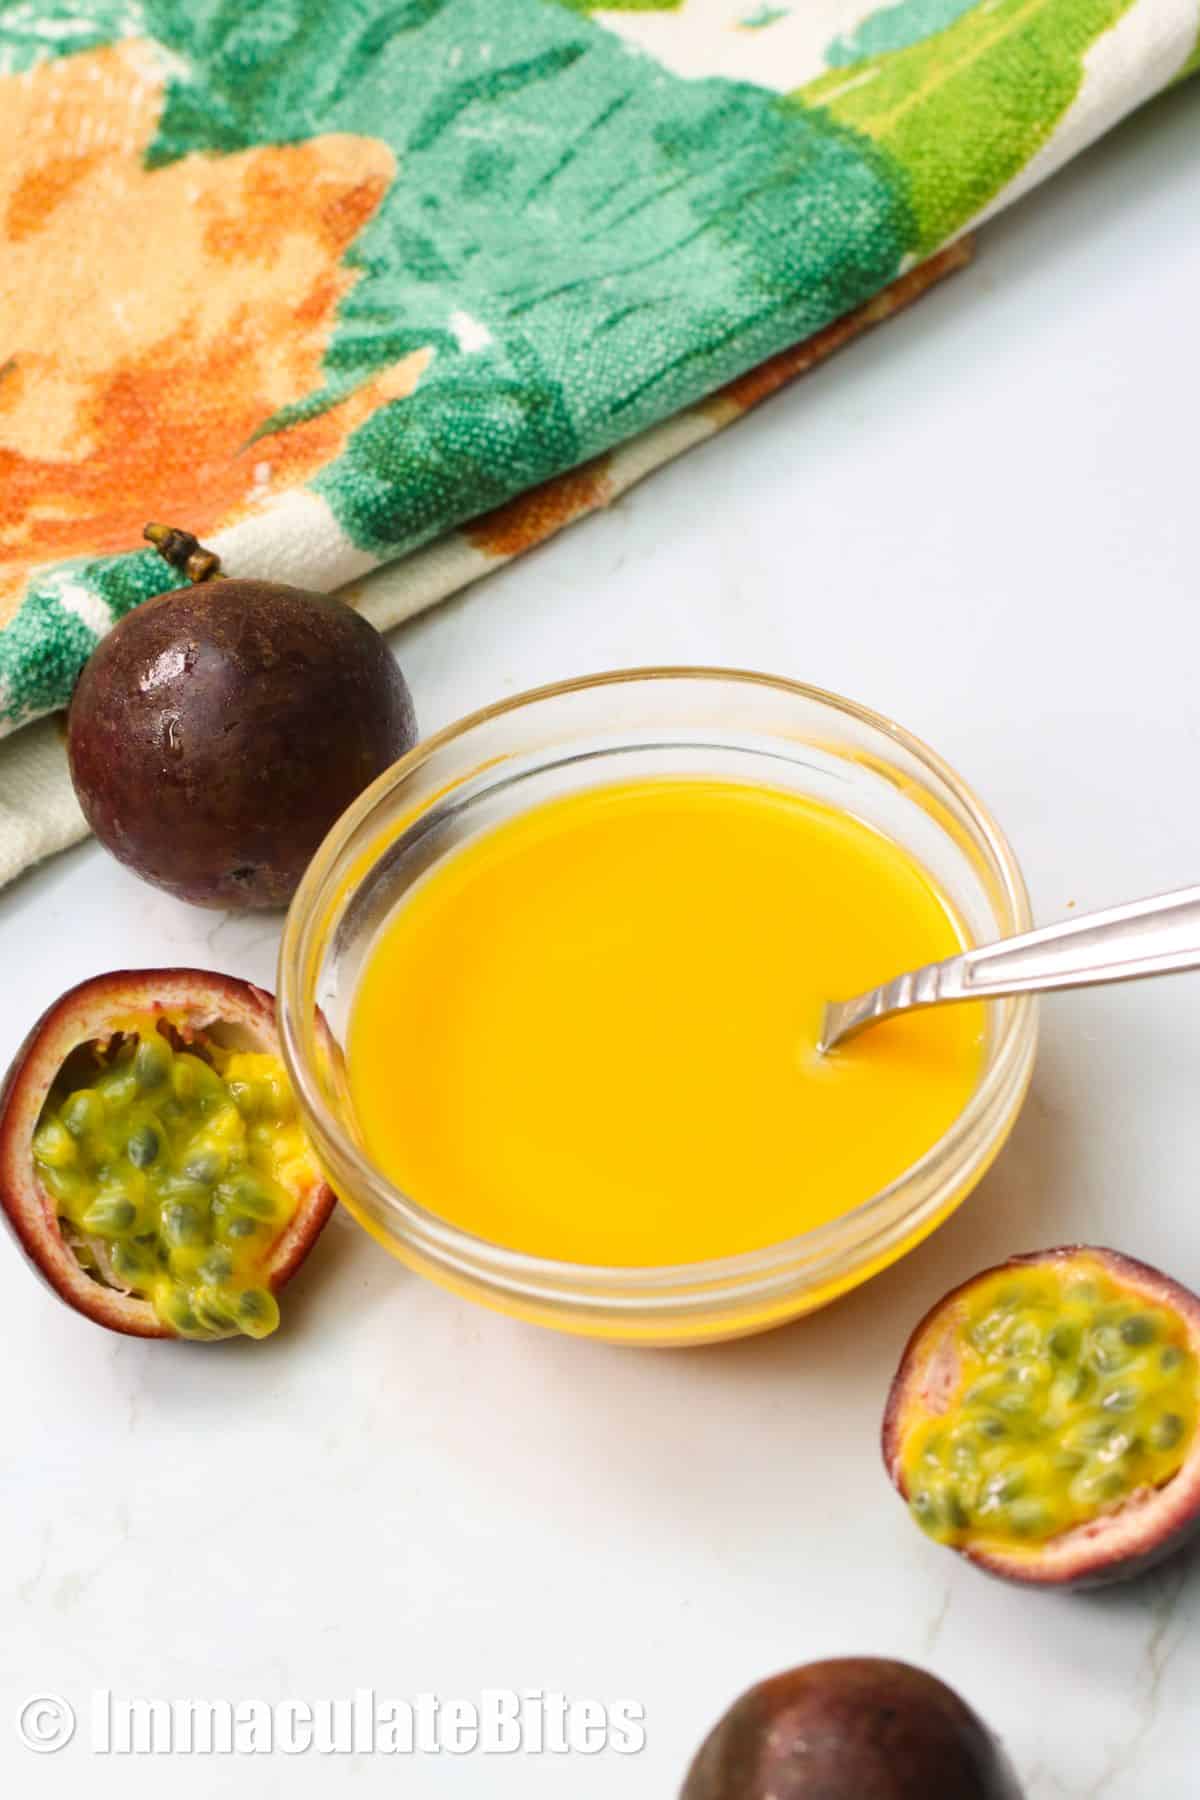 Passion Fruit Puree - Immaculate Bites